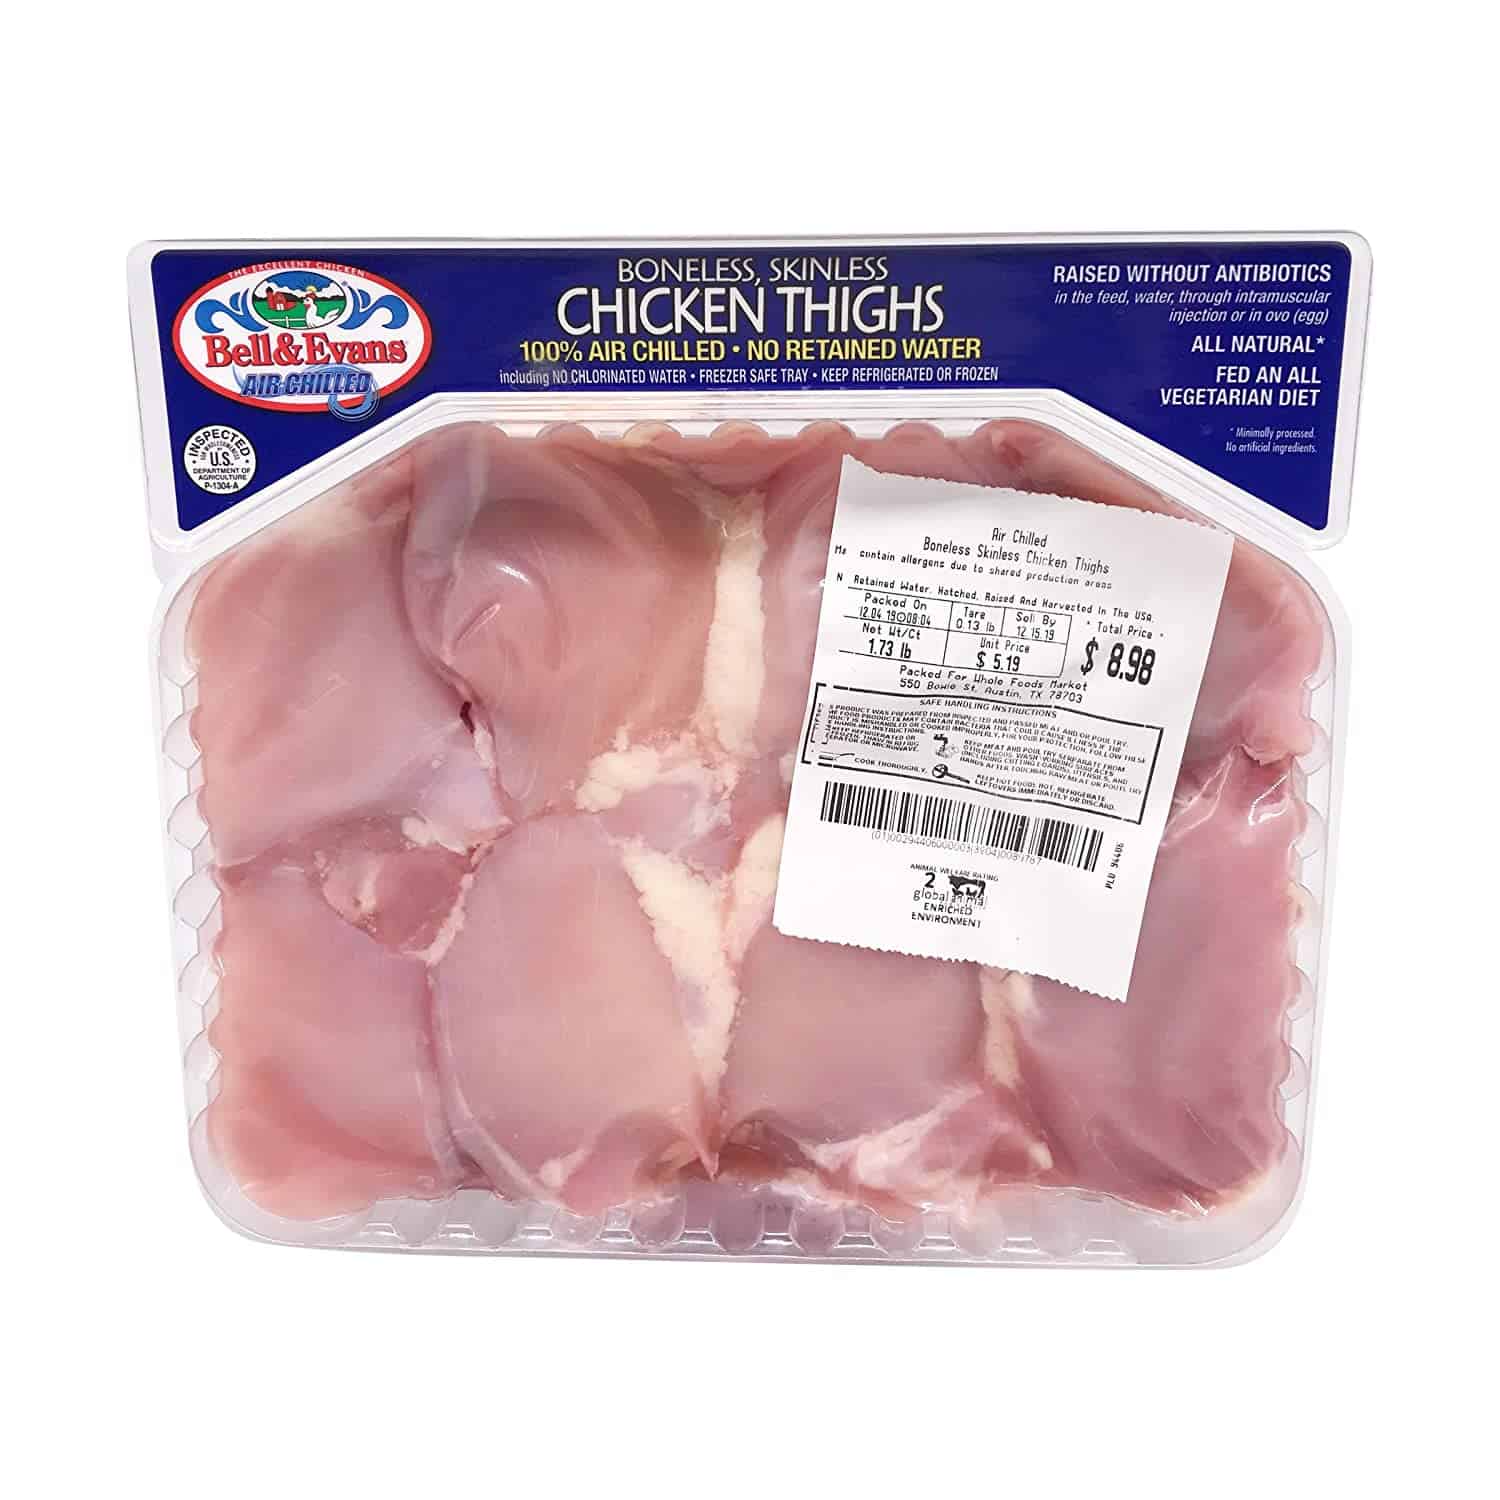 Bell and Evans Chicken Thigh Boneless Skinless Pack